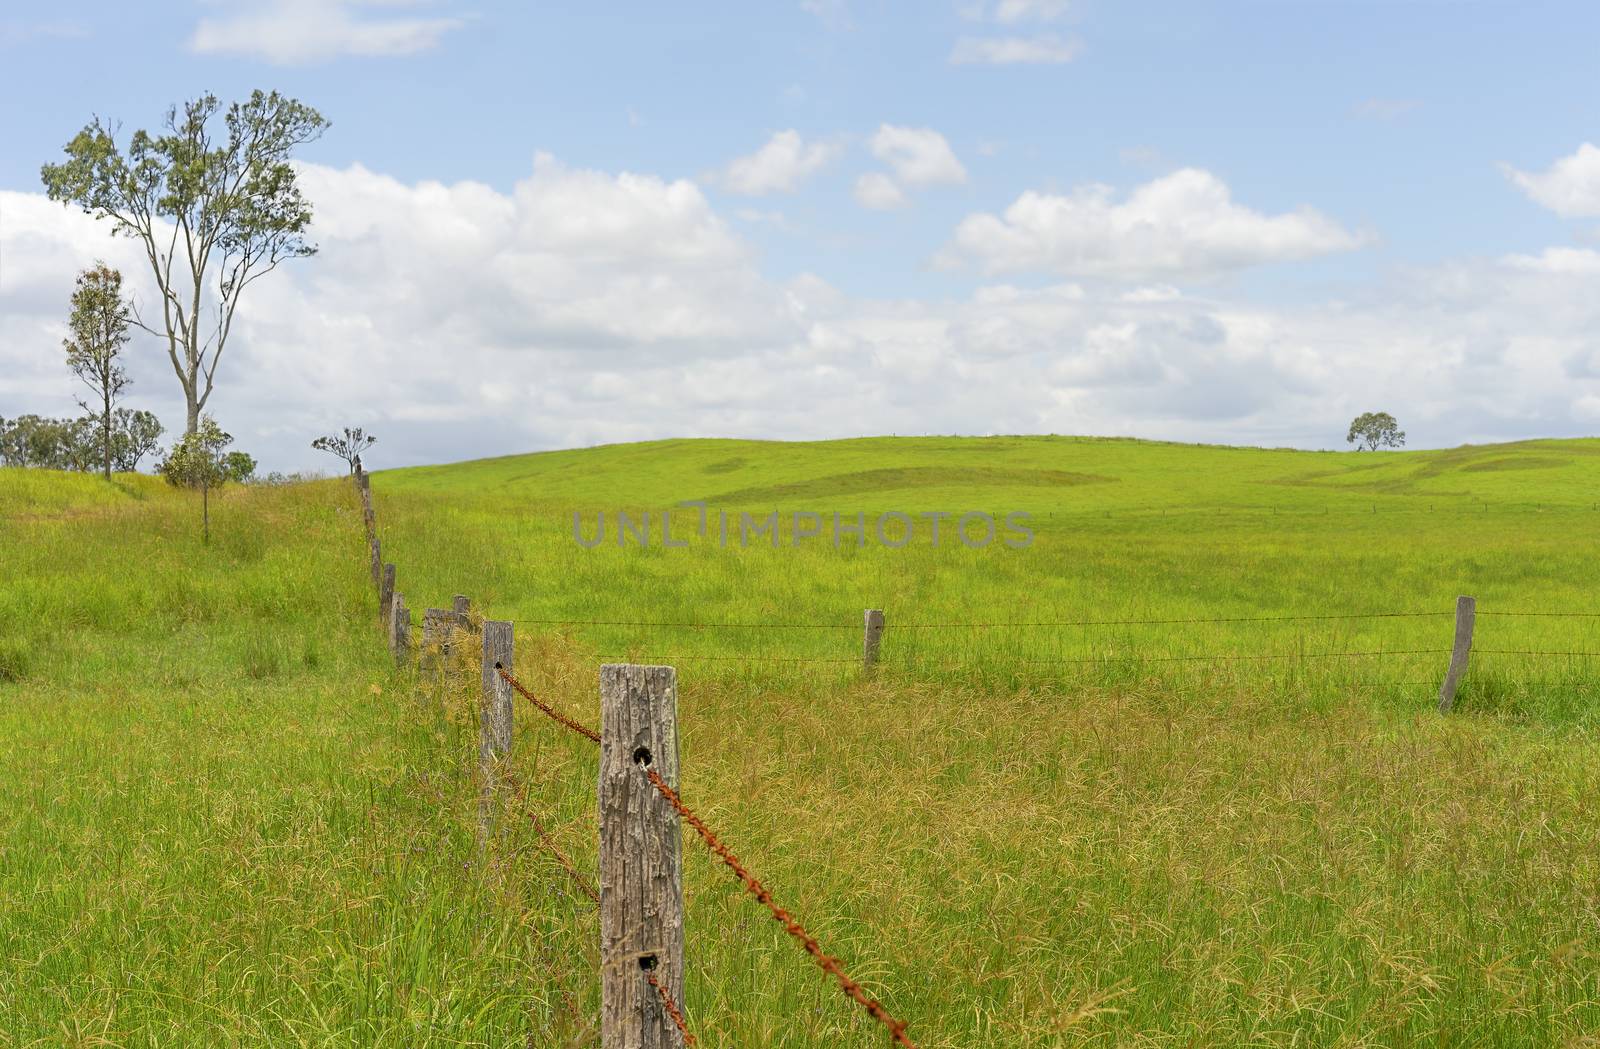 Grazing Paddocks or pastures  in Rural Queensland Australia fenced with barbed wire and wooden posts and growing lush green Rhodes grass for a cattle fodder crop for a country background image